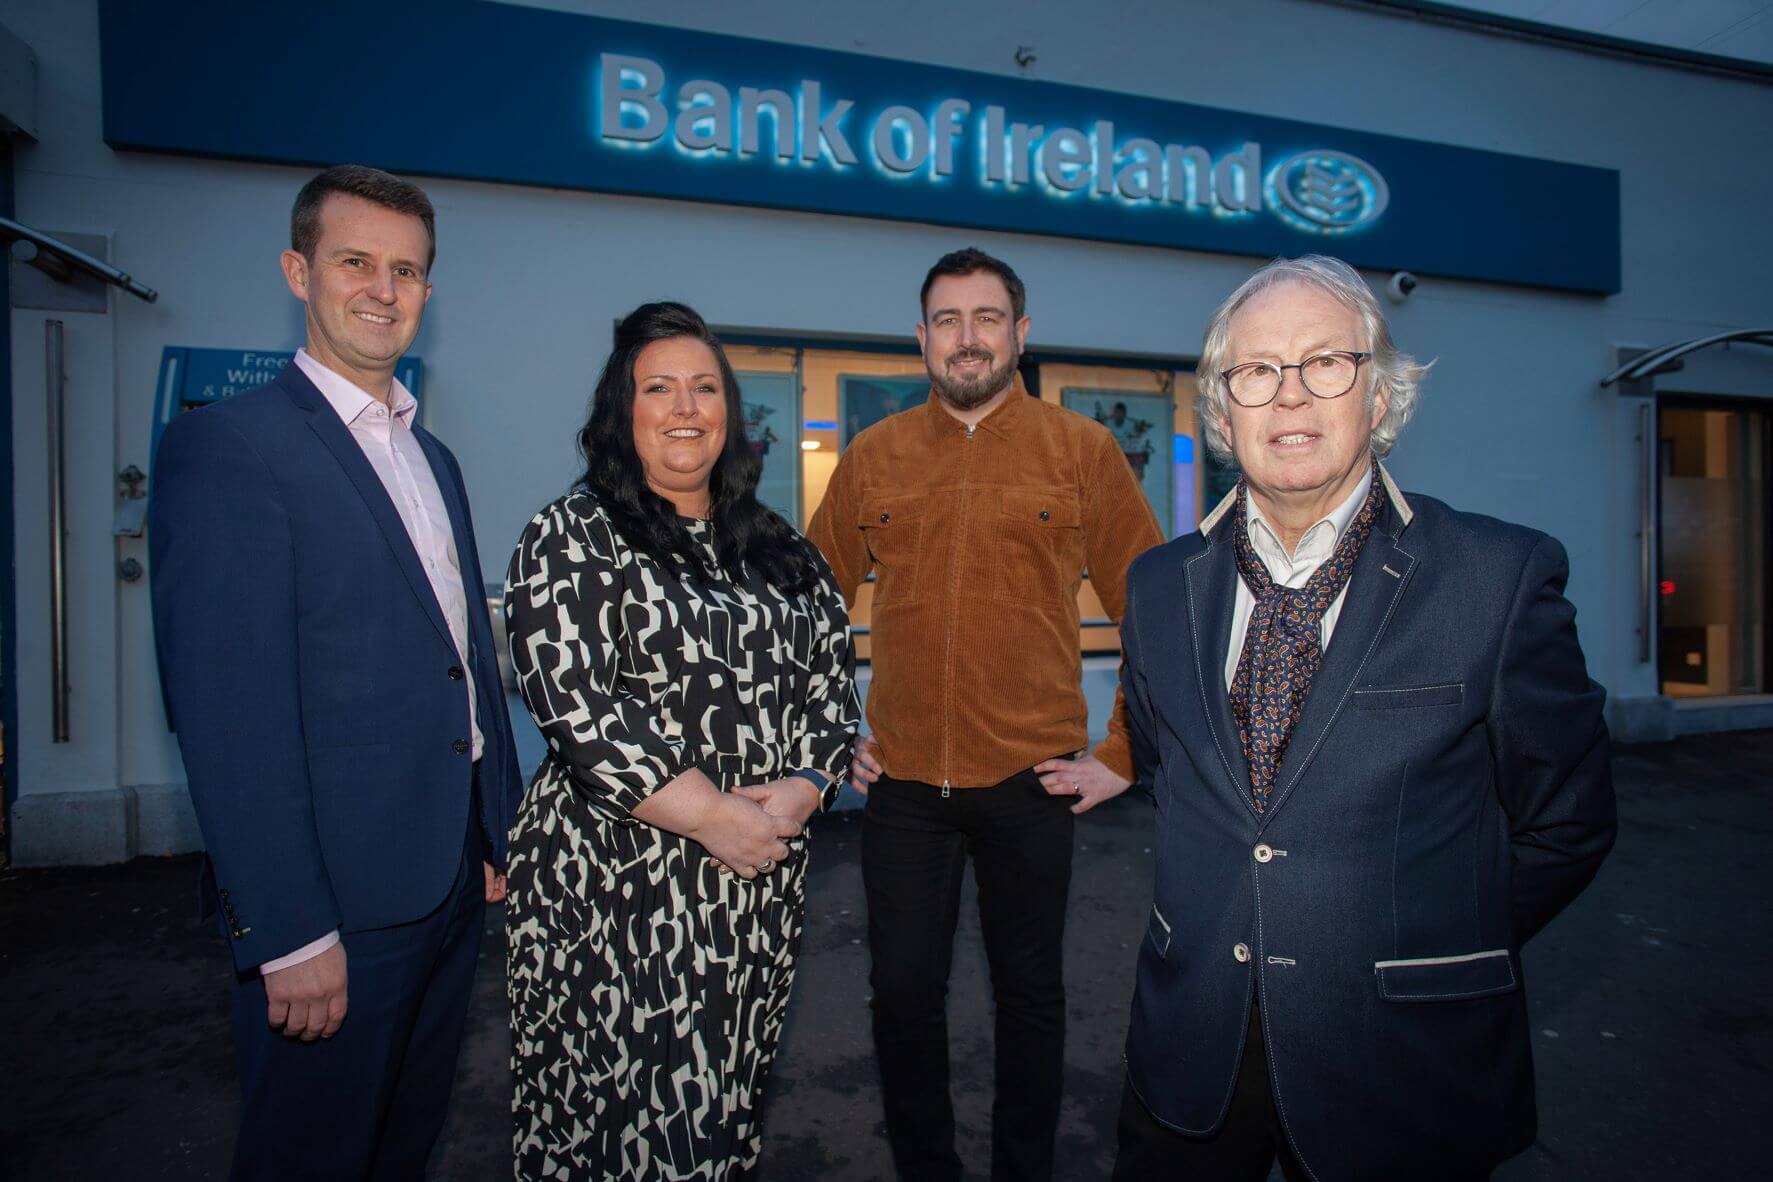 Colleen Casey, Bank of Ireland Andersonstown Branch Manager with invitees standing outside the Andersonstown Branch